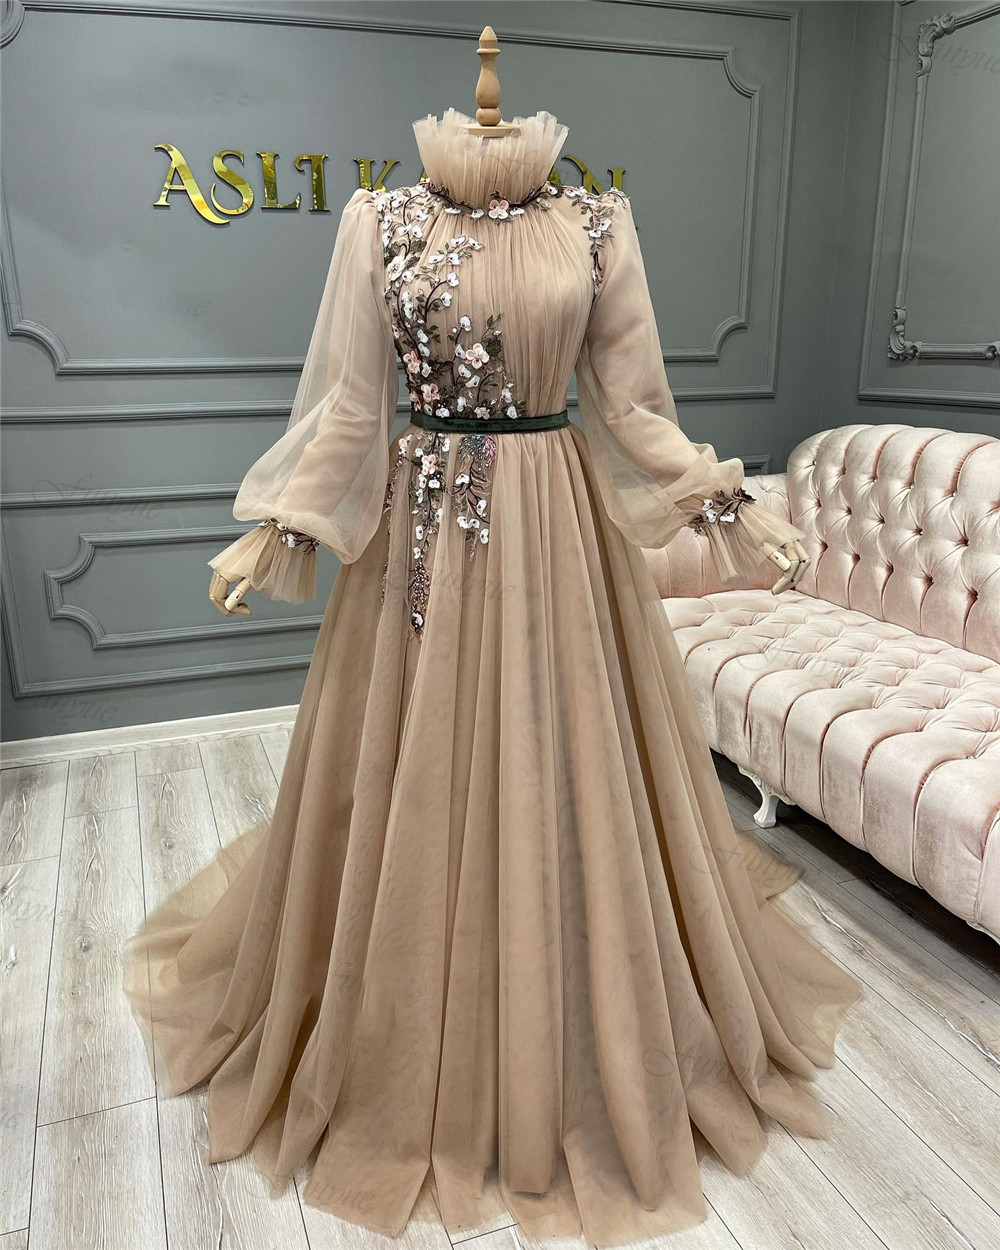 Ladies Dresses For Special Occasions Champagne Arabic Prom Dresses Long Sleeve Embrodiery Applique Elegant Muslim Prom Gown Robes De Bal